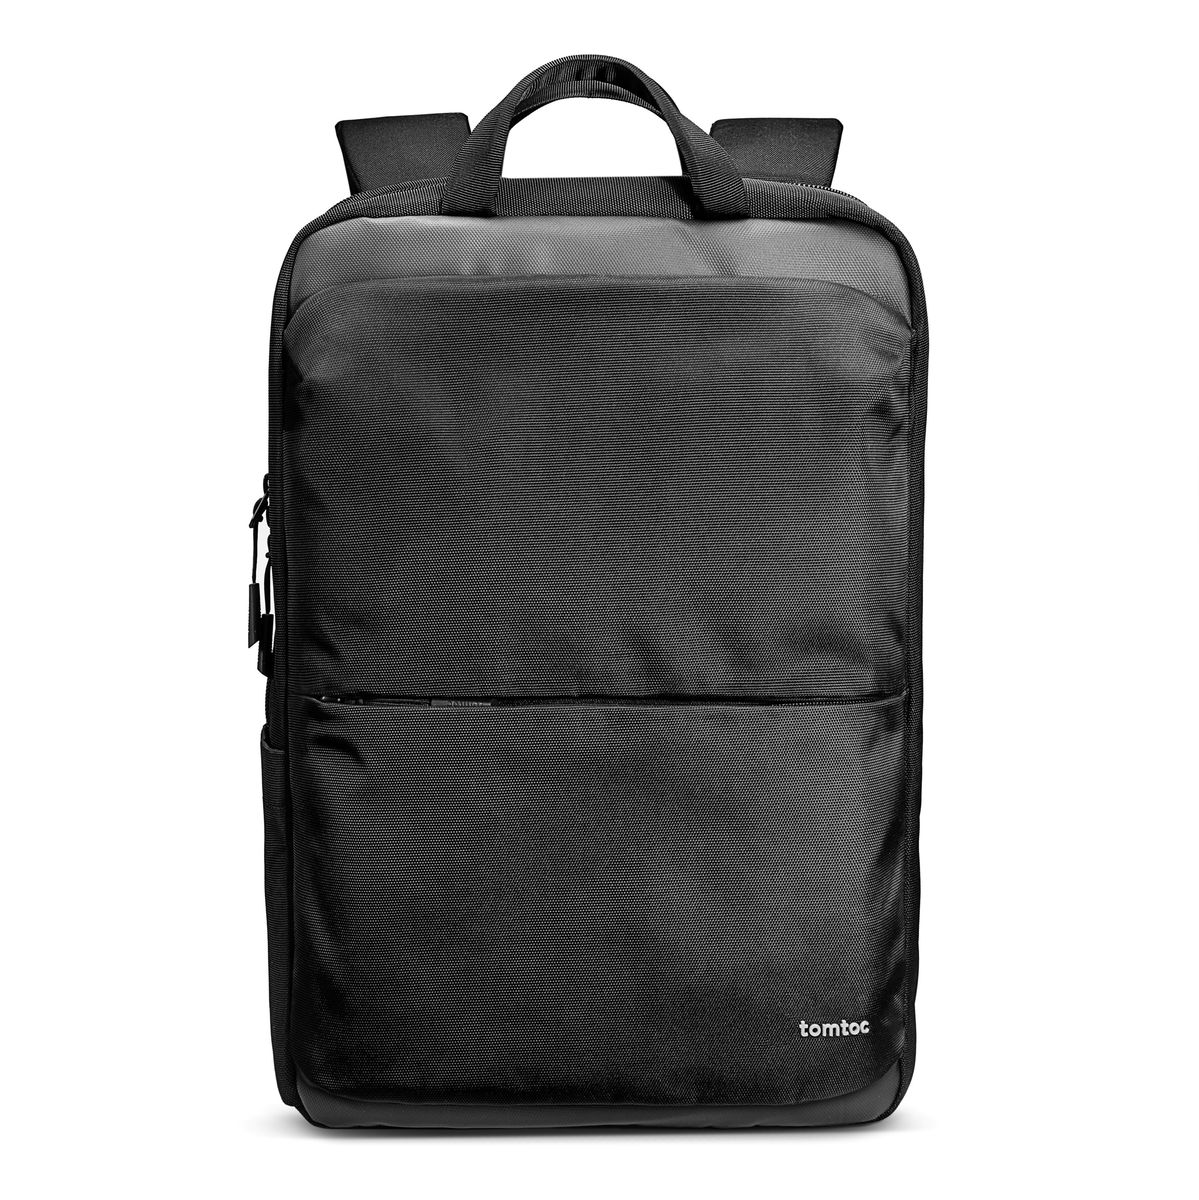 Tomtoc Navigator-T71 Laptop Backpack 20L For Commuting and Travel ...